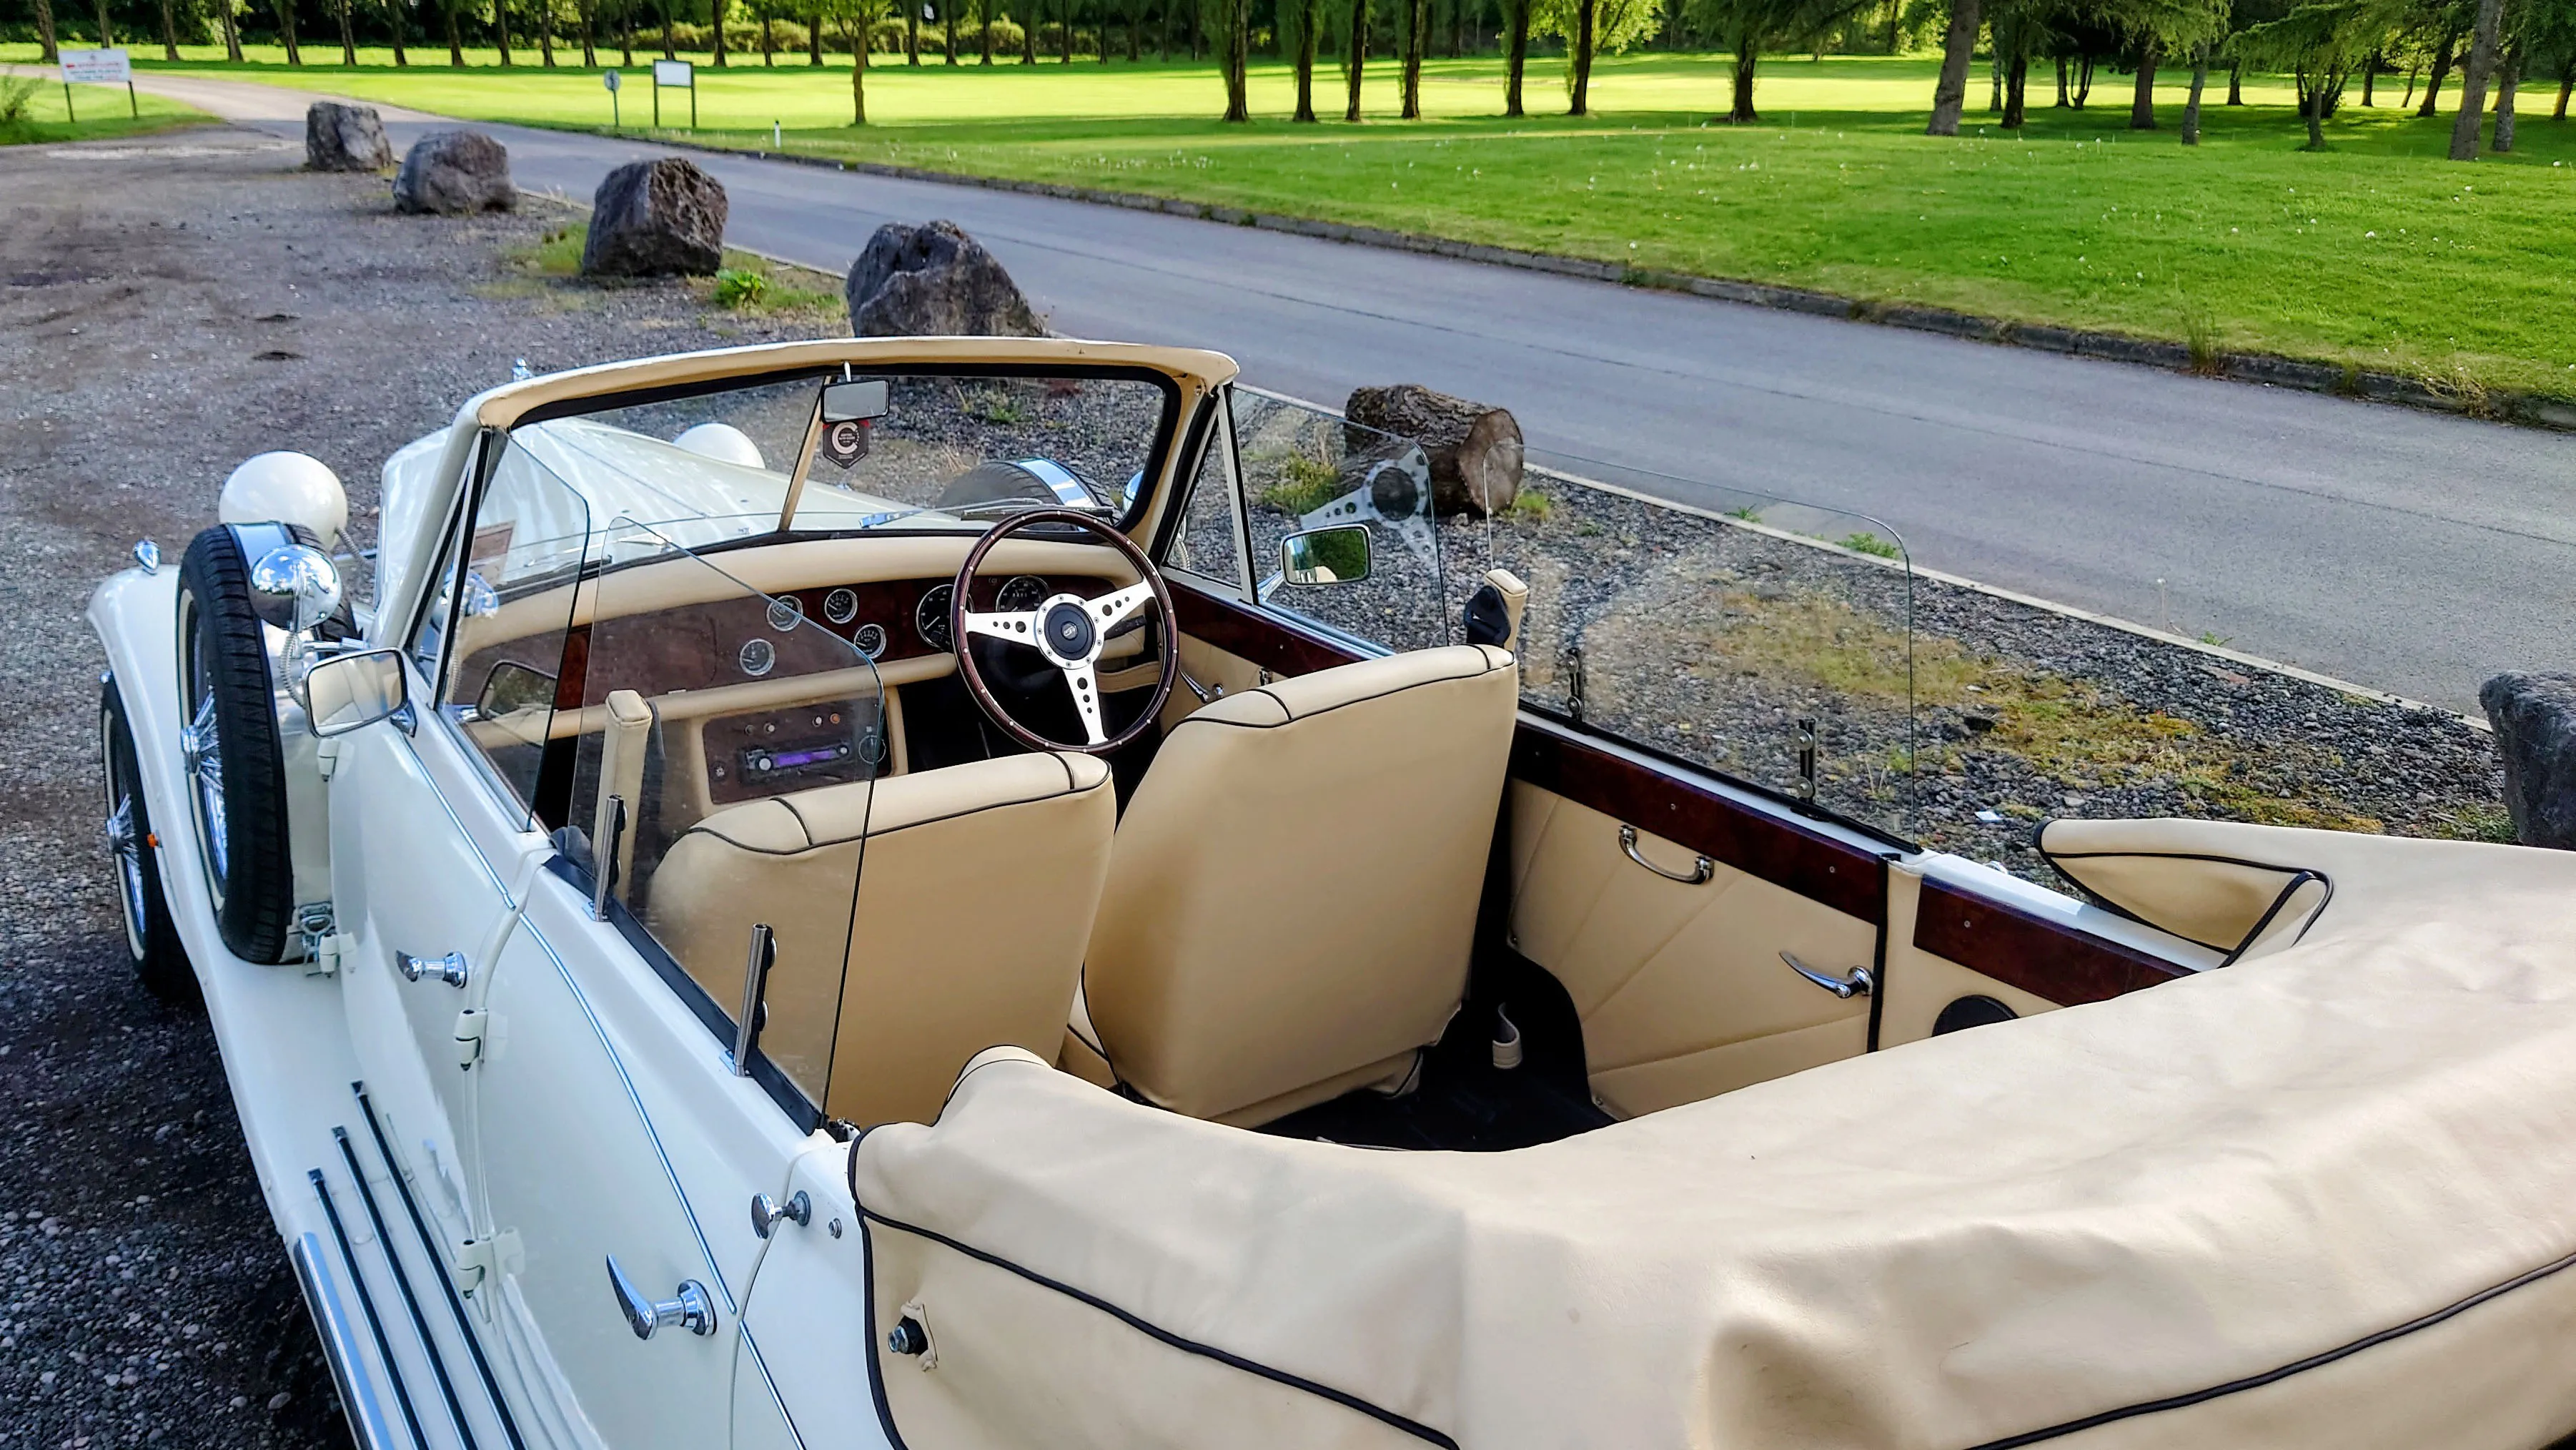 Vintage Beauford with fully opened roof showing the cream leather inerior seating